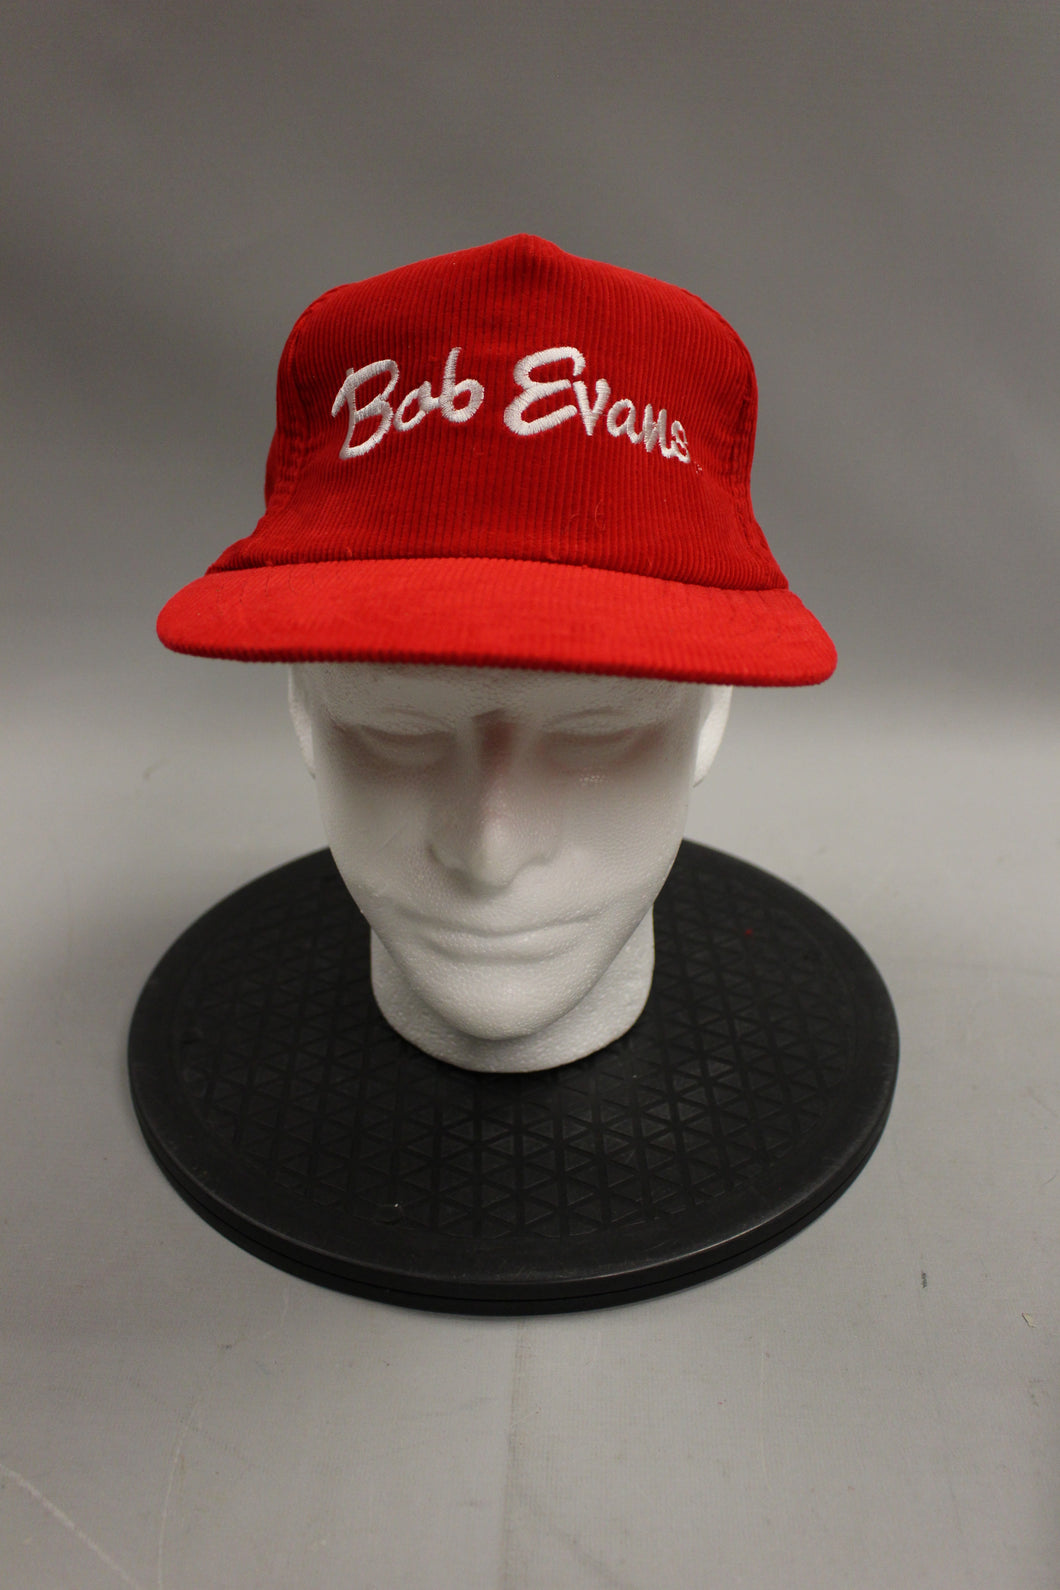 Vintage Bob Evans Soft Fuzzy Workers Hat -Red -Used